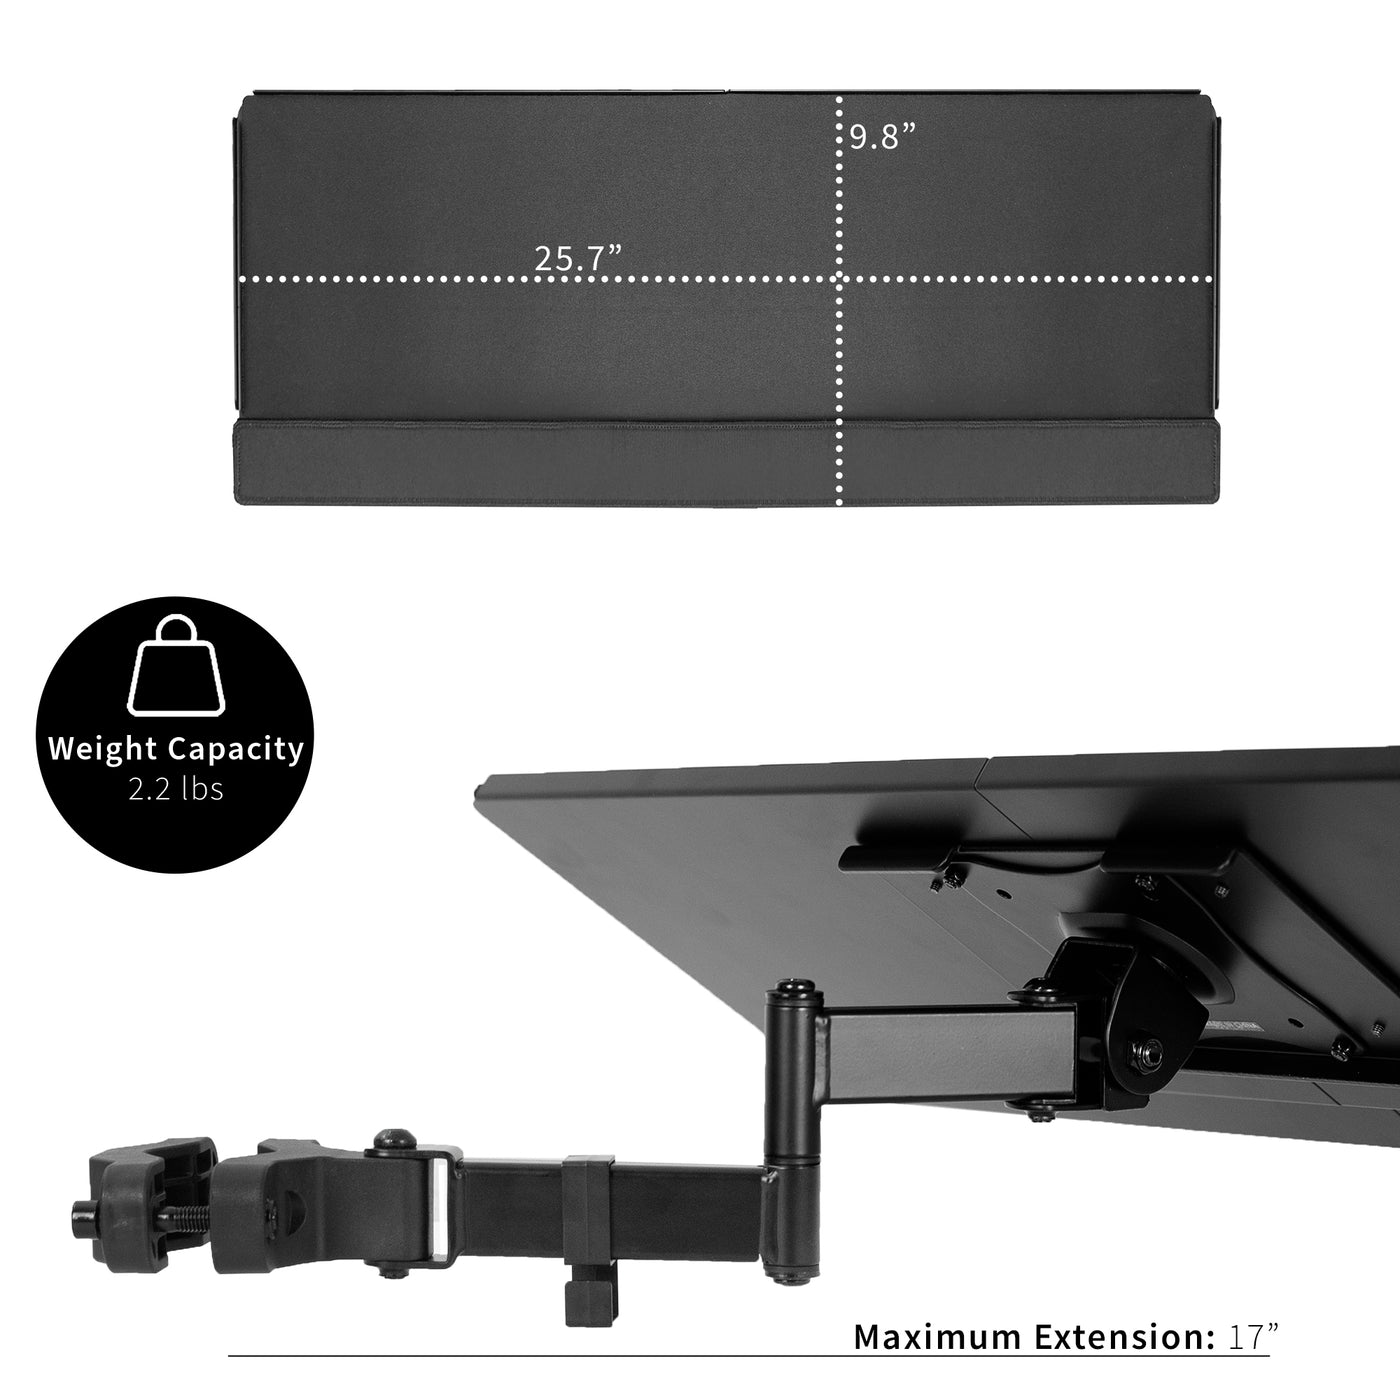  Universal mount is ideal for adding a keyboard tray to an existing monitor stand or any pole within the diameter range.